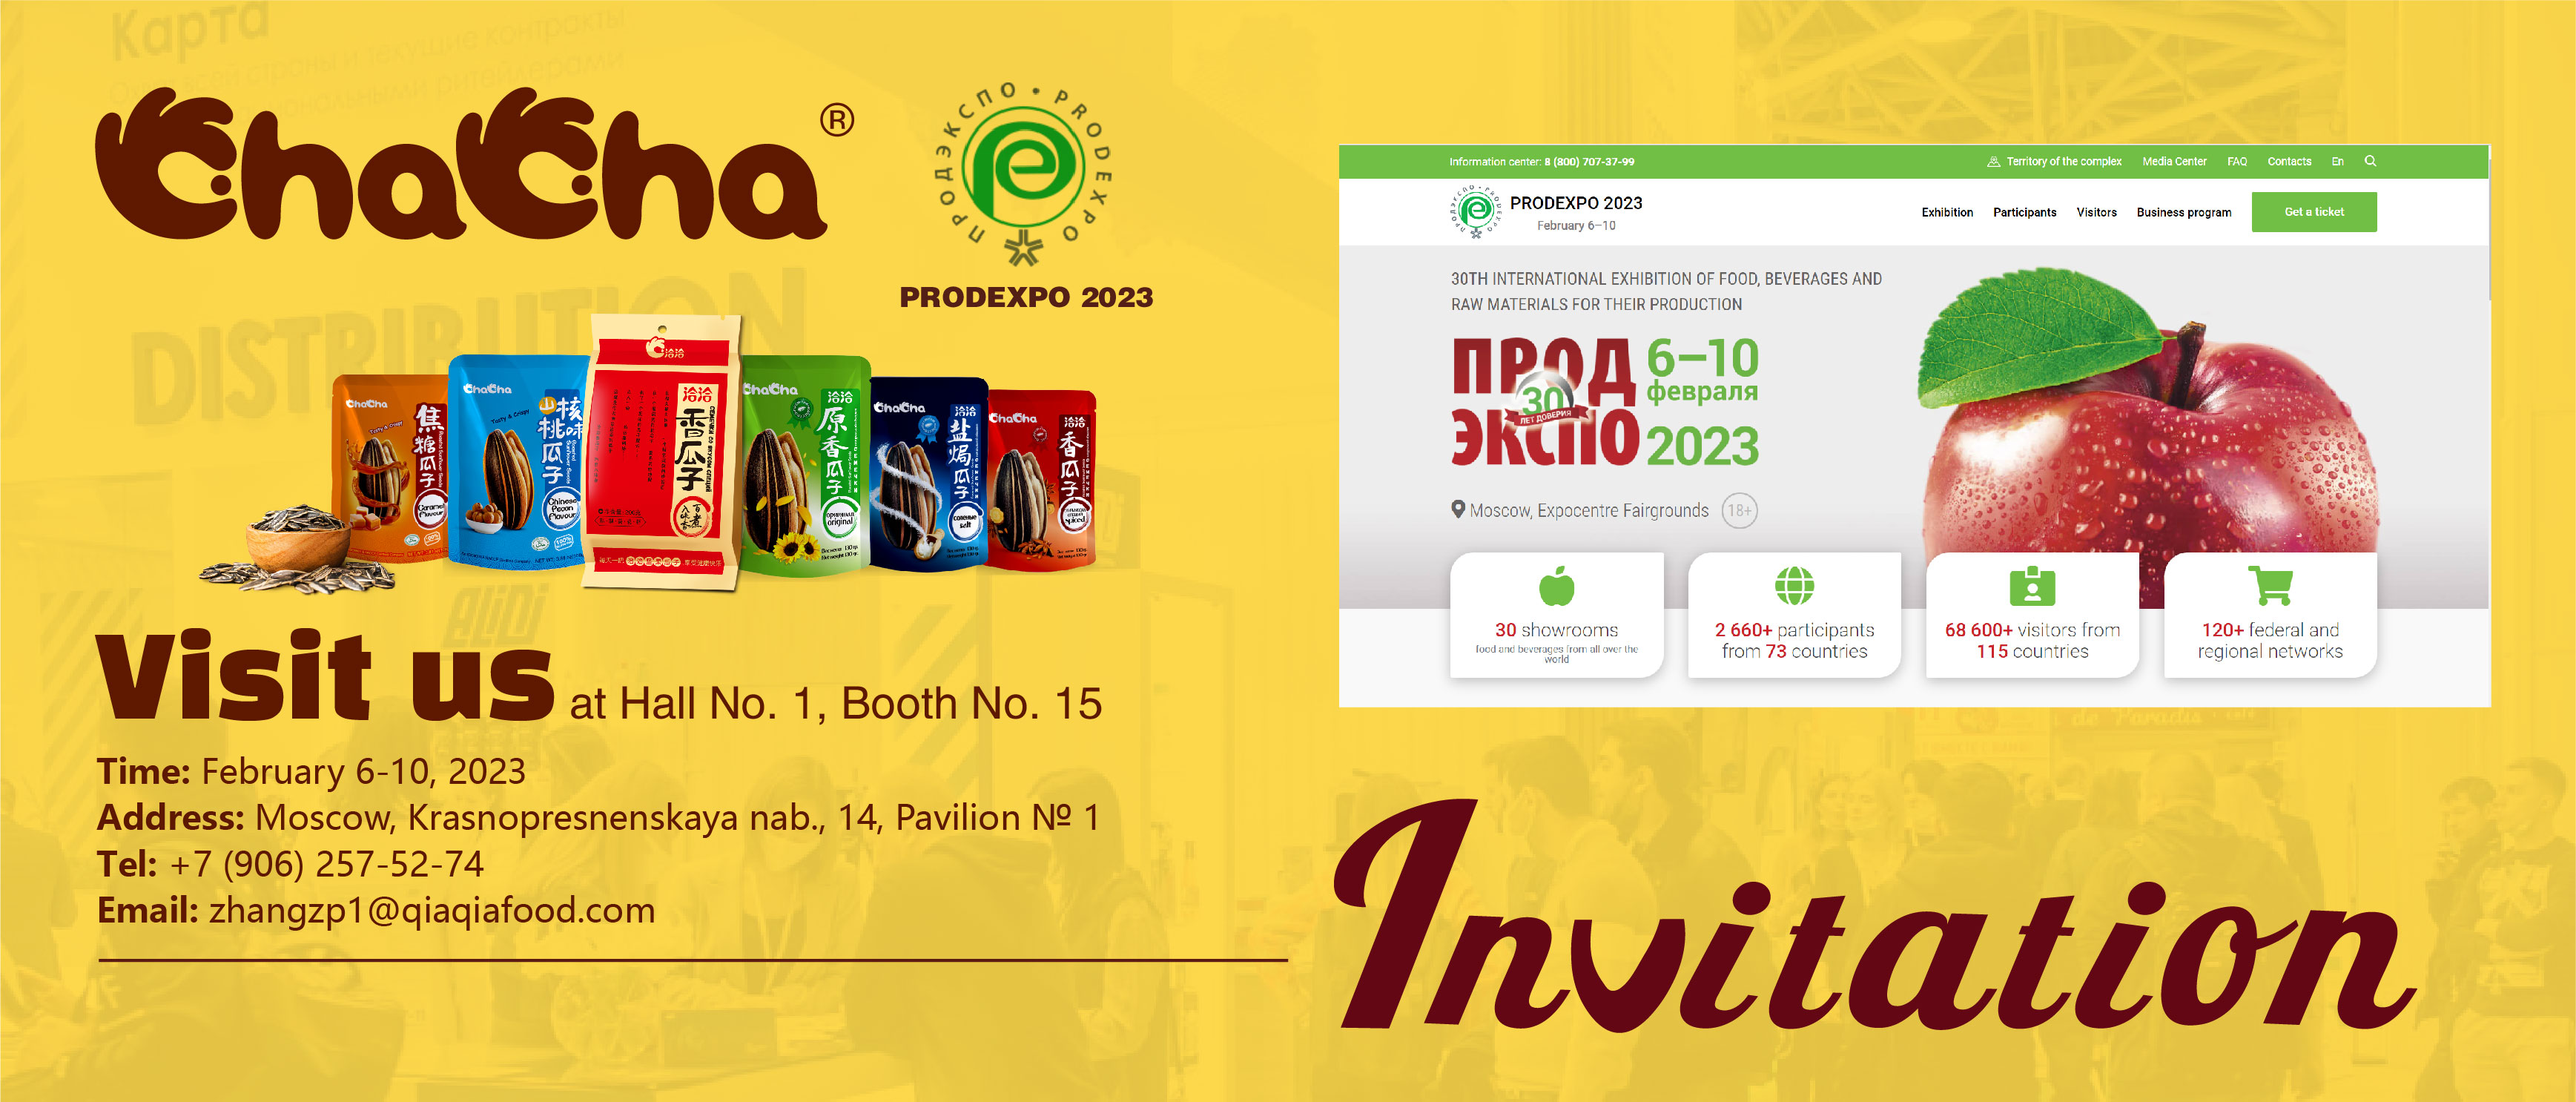 ChaCha will participate in PRODEXPO 2023. Welcome your arrival！！